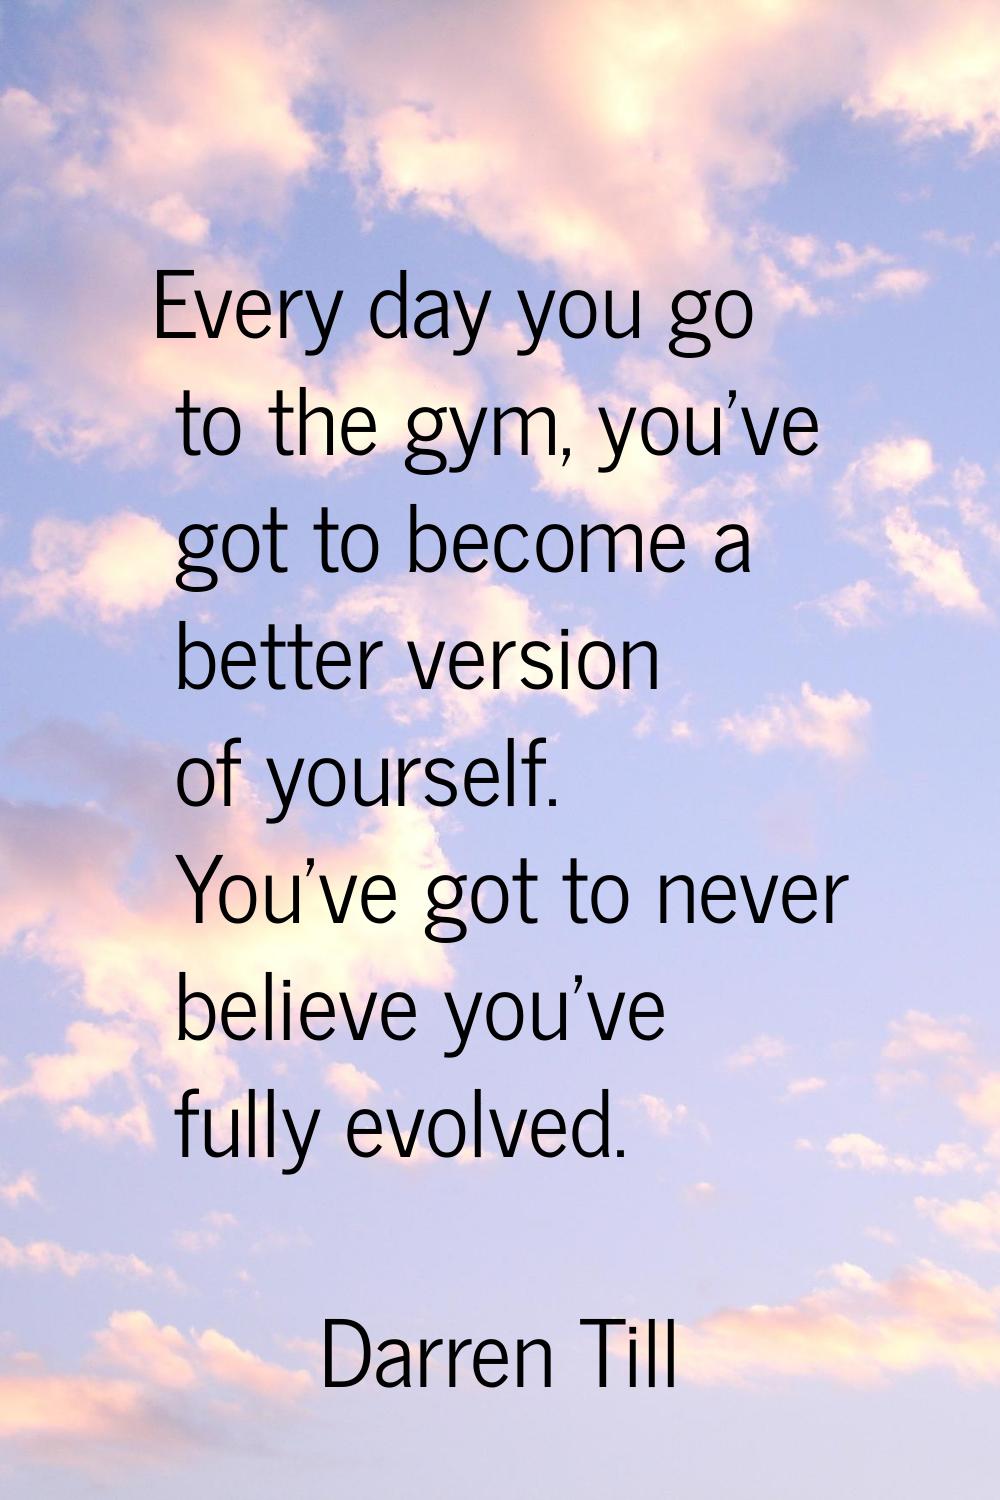 Every day you go to the gym, you've got to become a better version of yourself. You've got to never